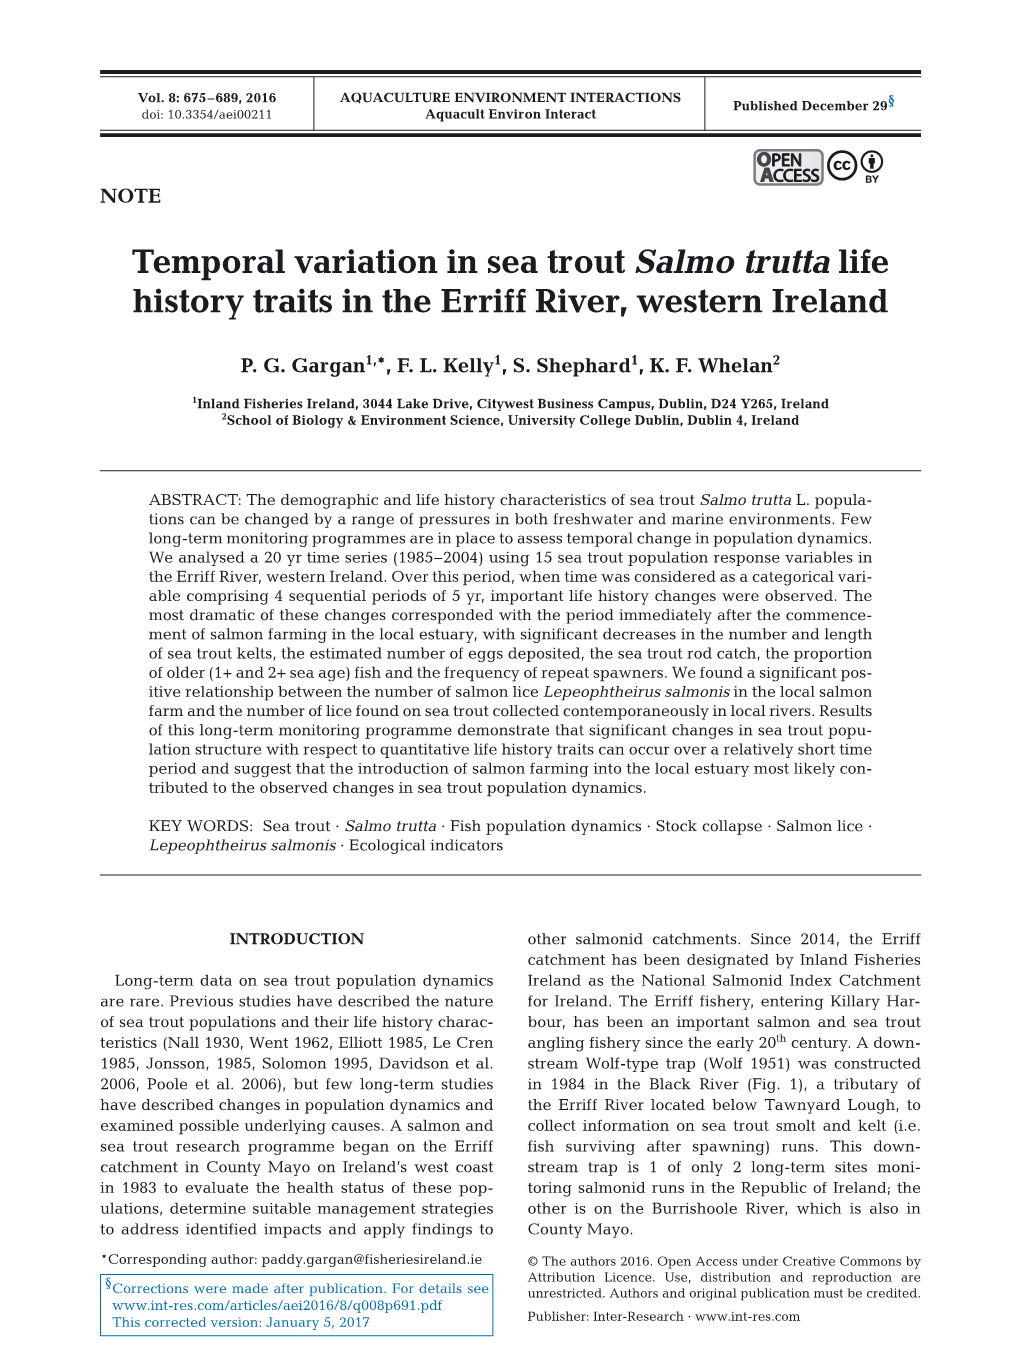 Temporal Variation in Sea Trout Salmo Trutta Life History Traits in the Erriff River, Western Ireland